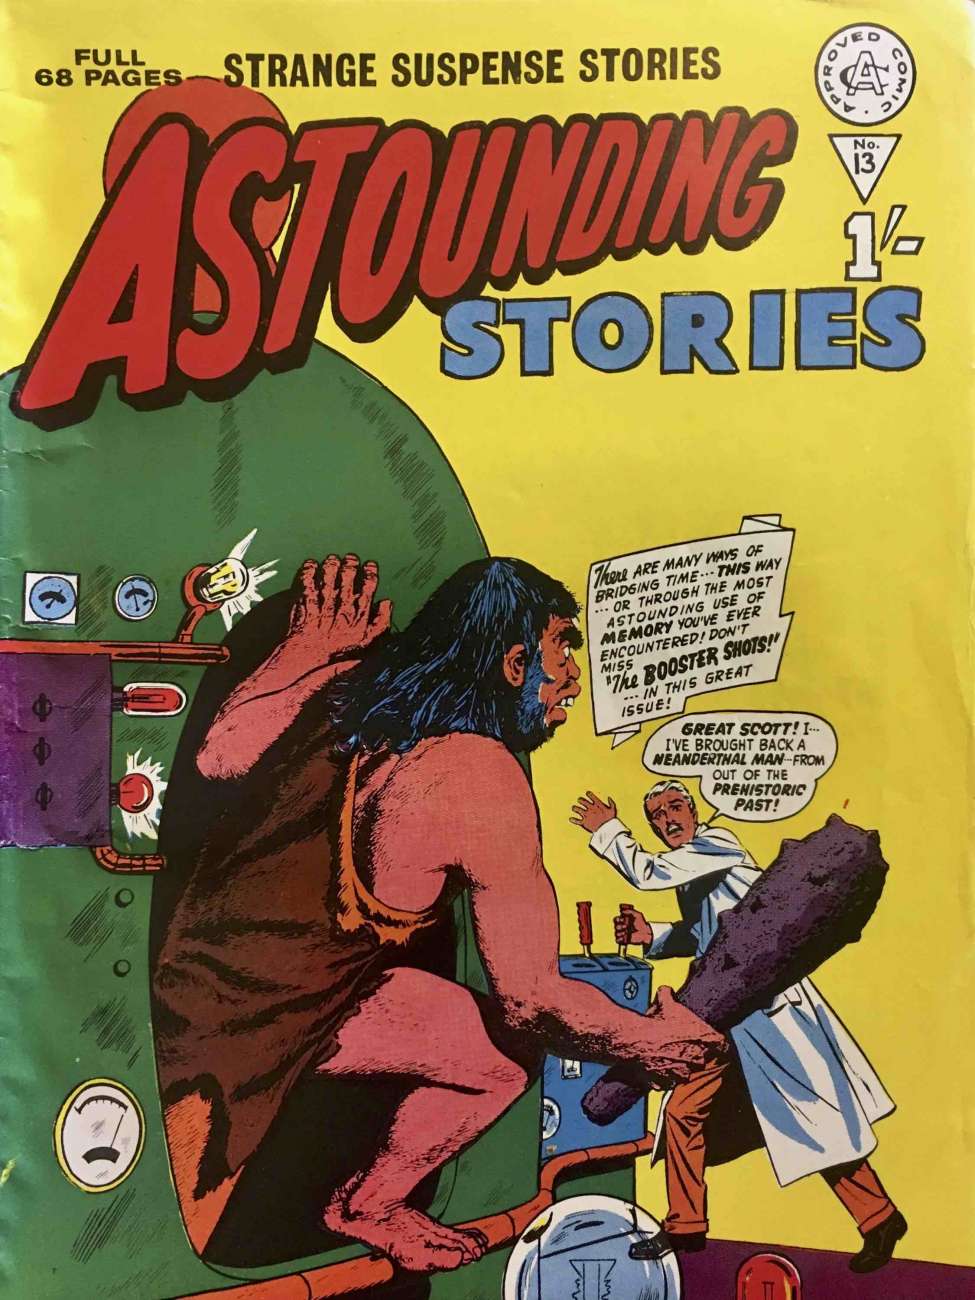 Book Cover For Astounding Stories 13